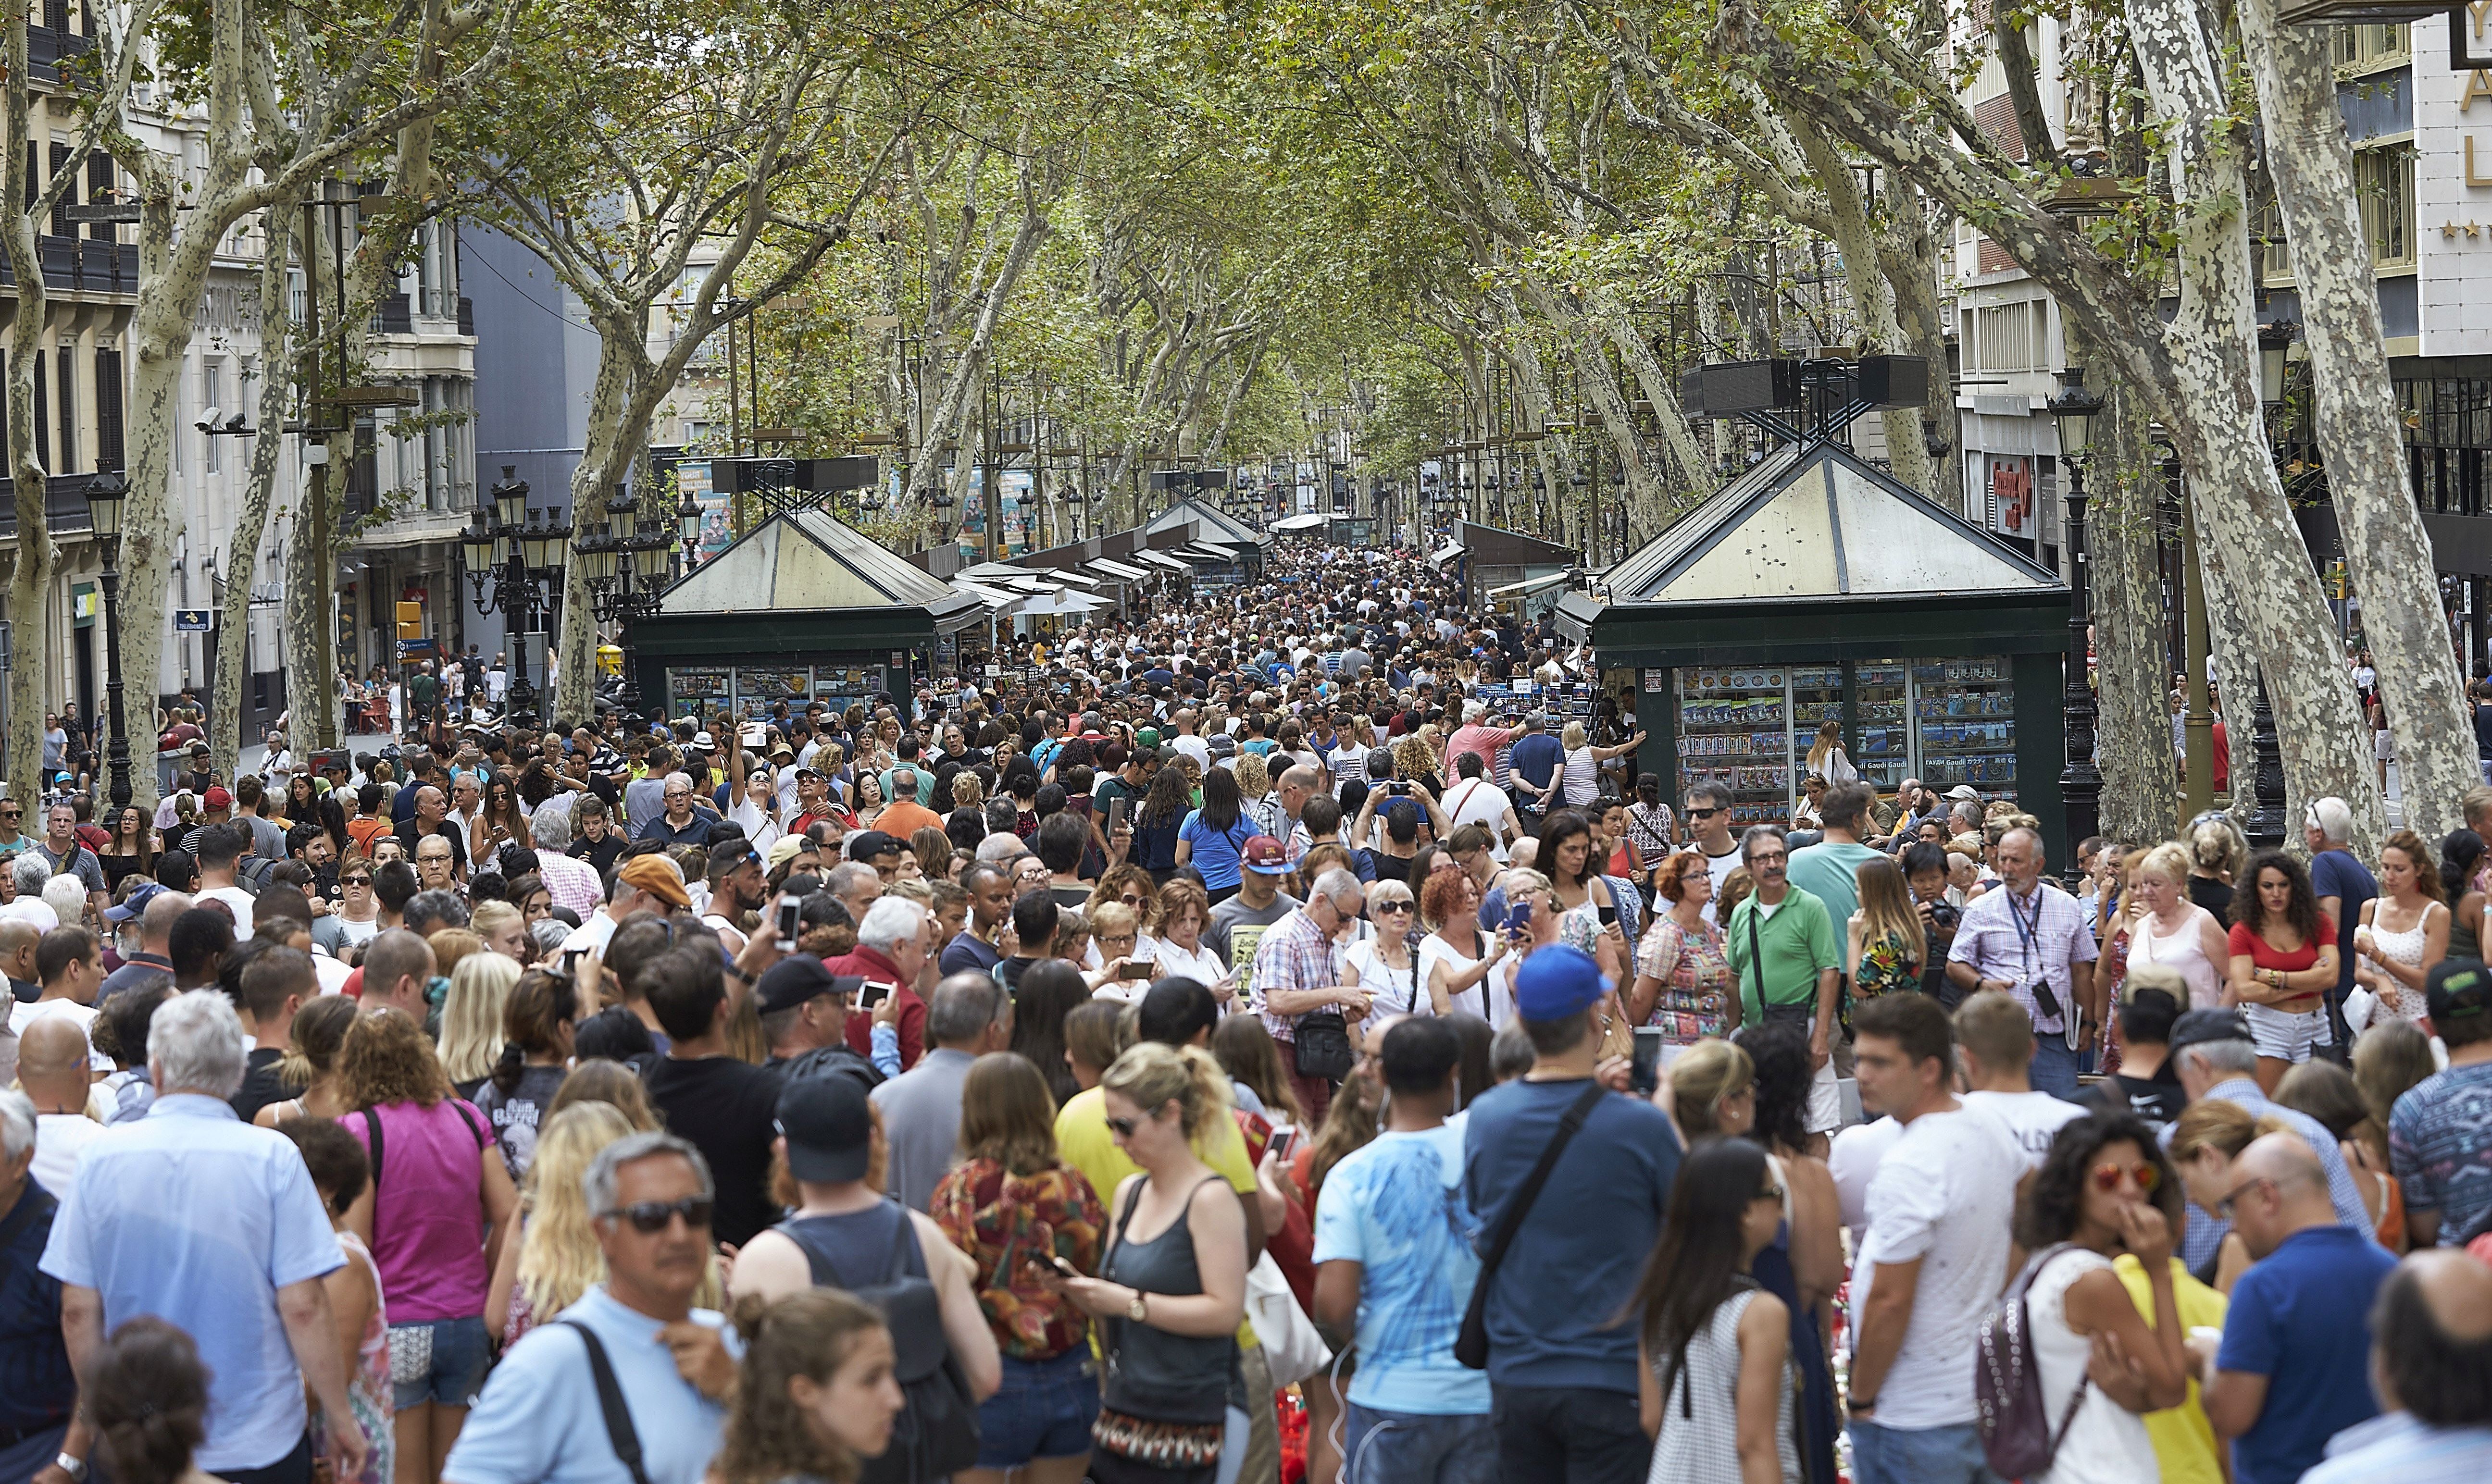 epa06153034 Residents and tourists crowd as they visit the Las Ramblas in Barcelona three days after the terrorr!st attacks in Barcelona and Cambrils, 20 August 2017 in Barcelona, Spain. At least 14 people were killed and some 130 others injured after cars crashed into pedestrians on the La Rambla boulevard in Barcelona and on a promenade in the coastal city of Cambrils on 17 August. Spanish police have stated that the attacks in Barcelona and in Cambrils were linked. The so-called 'Islamic State' (IS) in the meantime has claimed responsibility for the attacks in Barcelona and Cambrils.  EPA/ALEJANDRO GARCIA